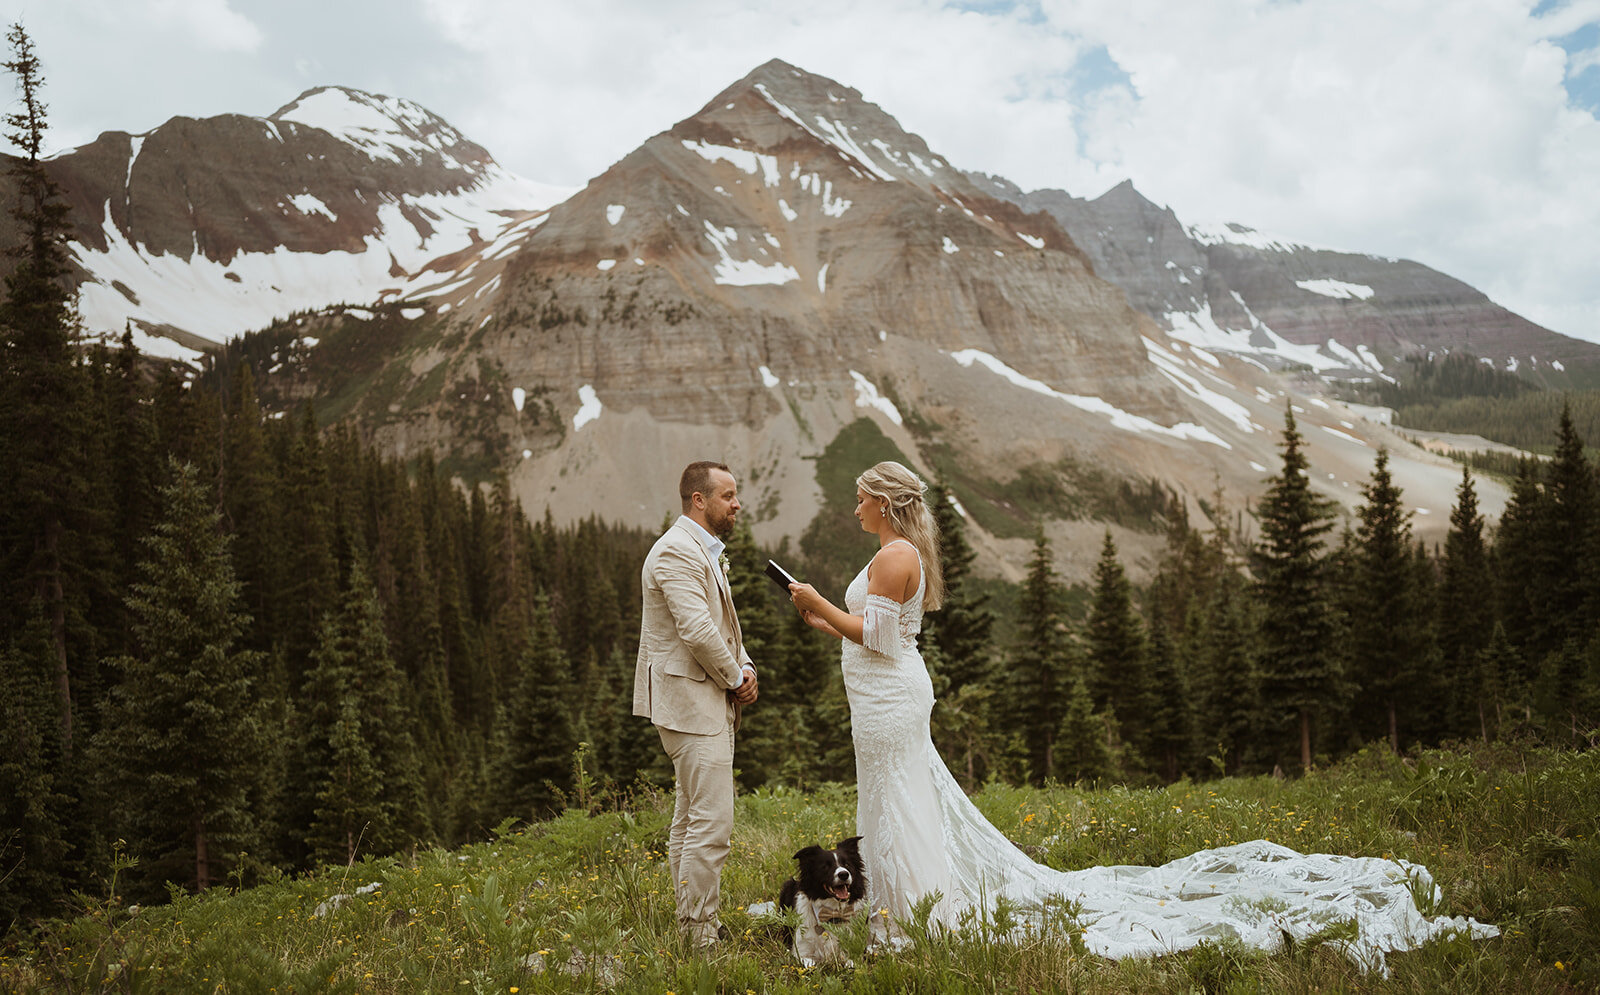 The couple is facing each other with their dog in between them as they read their vows in a valley. It is summertime and very warm. The bride is wearing a dress with patterned lace, and the groom is wearing a tan suit. They are wiping away tears as they finish their telluride elopement. The couple decided to elope, and they hiked and off roaded on their elopement day. They included their dog in their elopement, which is a border Collie. The mountains are directly behind them and are framing them in this image. there is still snow on them, and there are wildflowers. If you want to find wildflowers on your telluride elopement, plan to elope in the early summer.